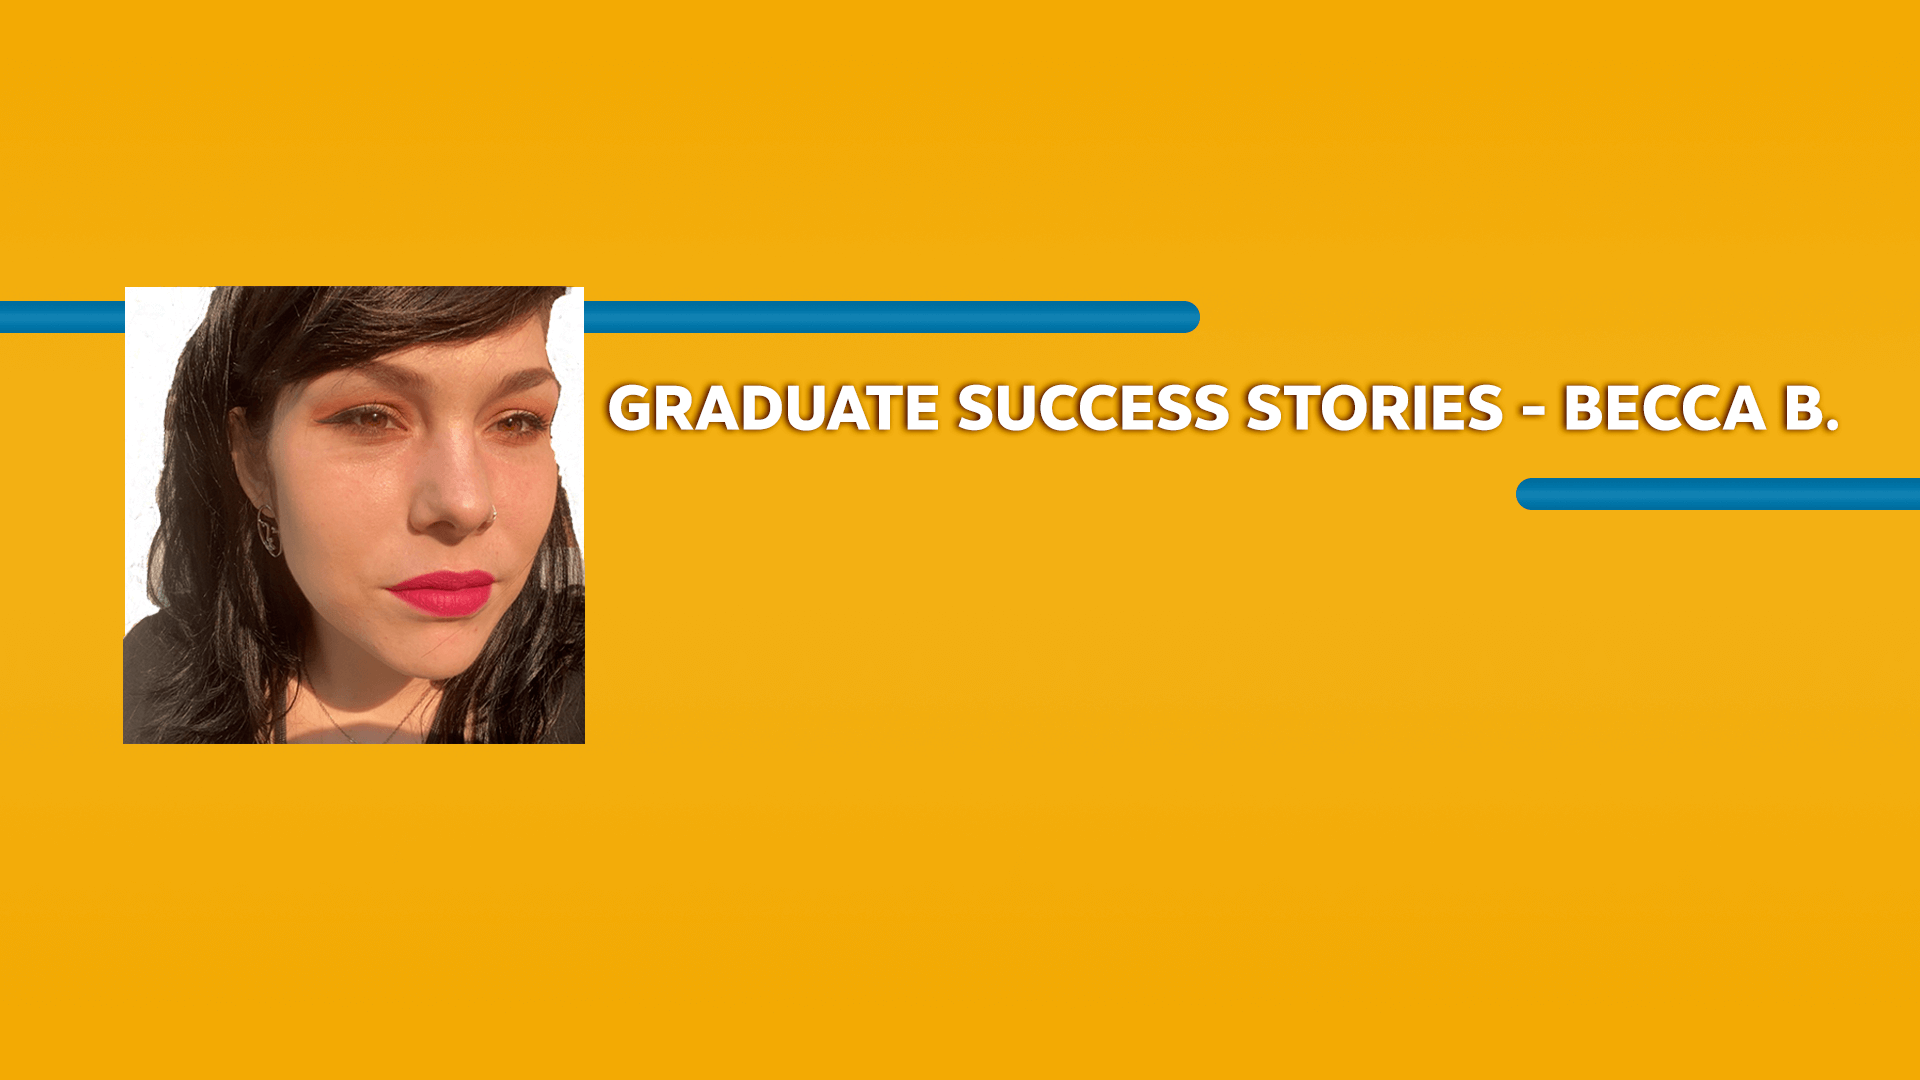 Orange rectangle with a picture of a woman and Graduate Success Stories - Becca B. text in white font